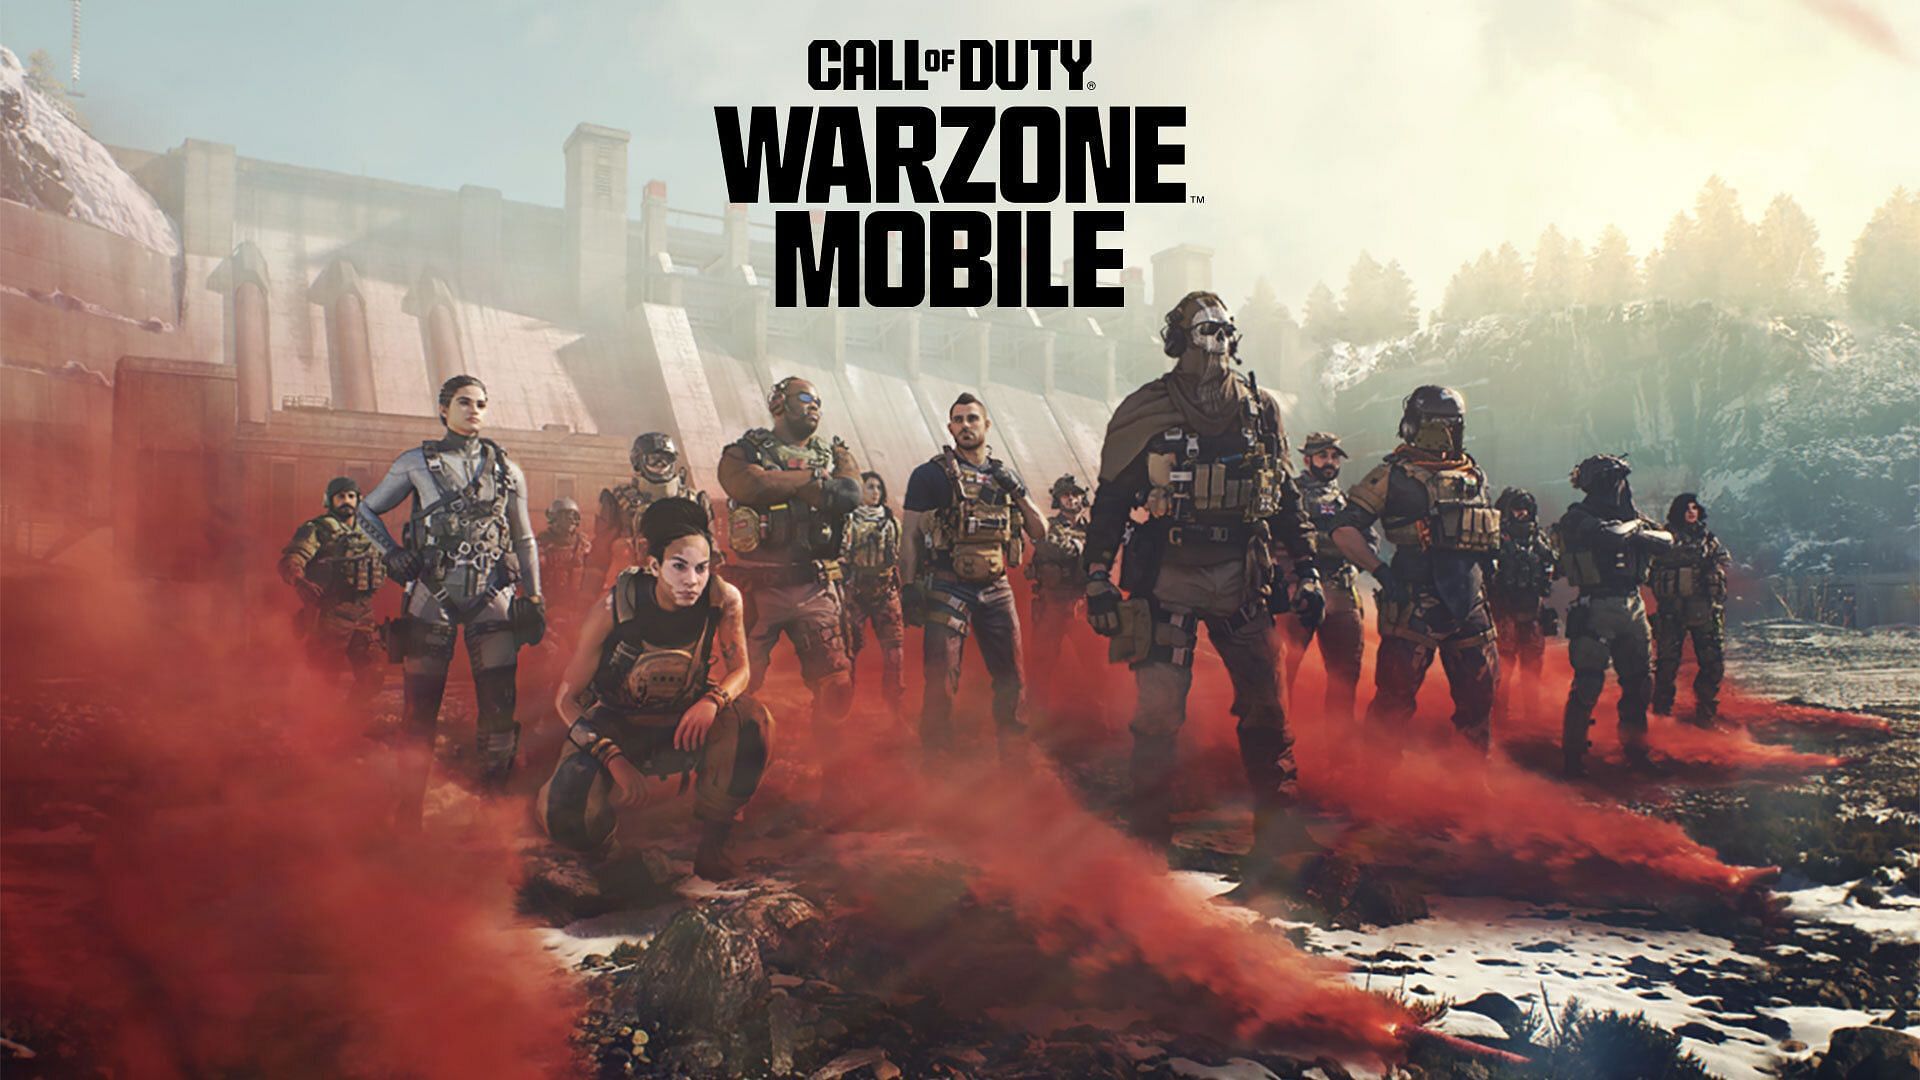 System requirements for Call of Duty Warzone Mobile (Image via Activision)